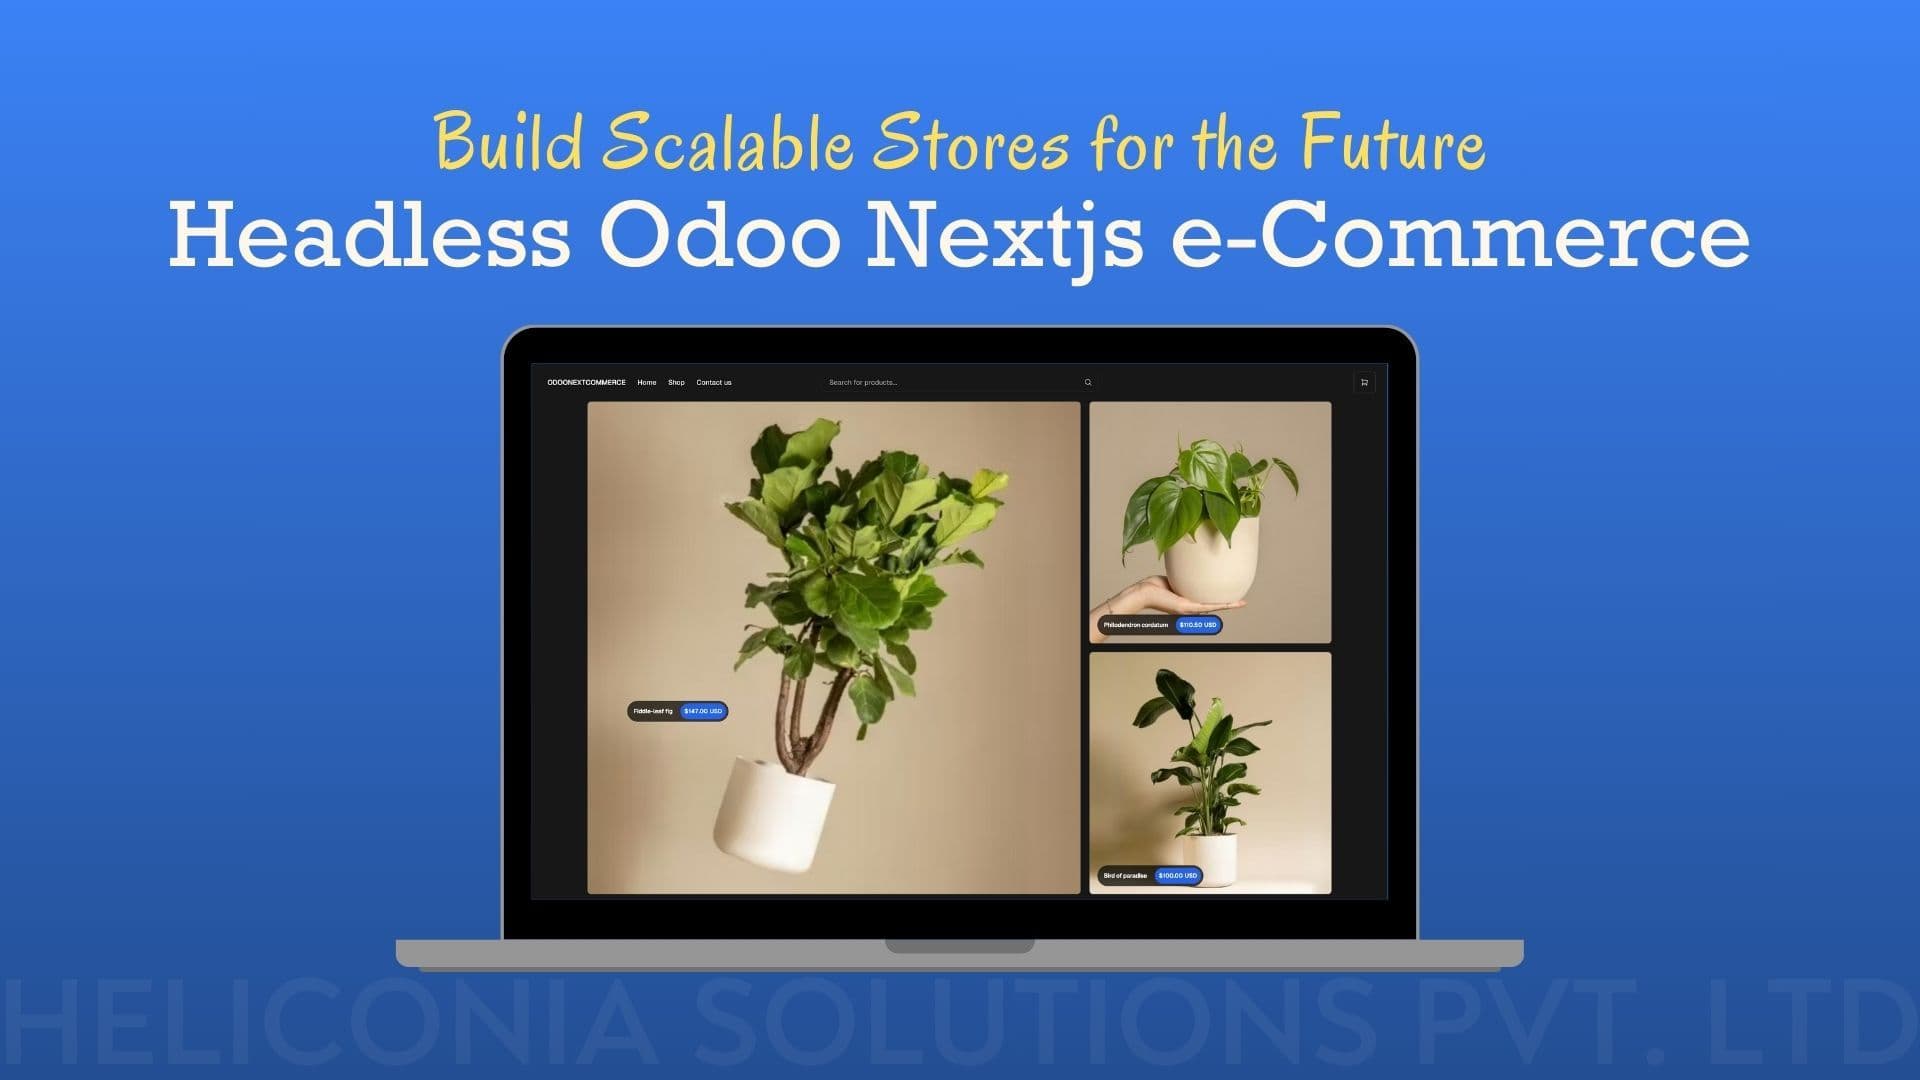 Headless Odoo Nextjs e-Commerce: Build Scalable Stores for the Future